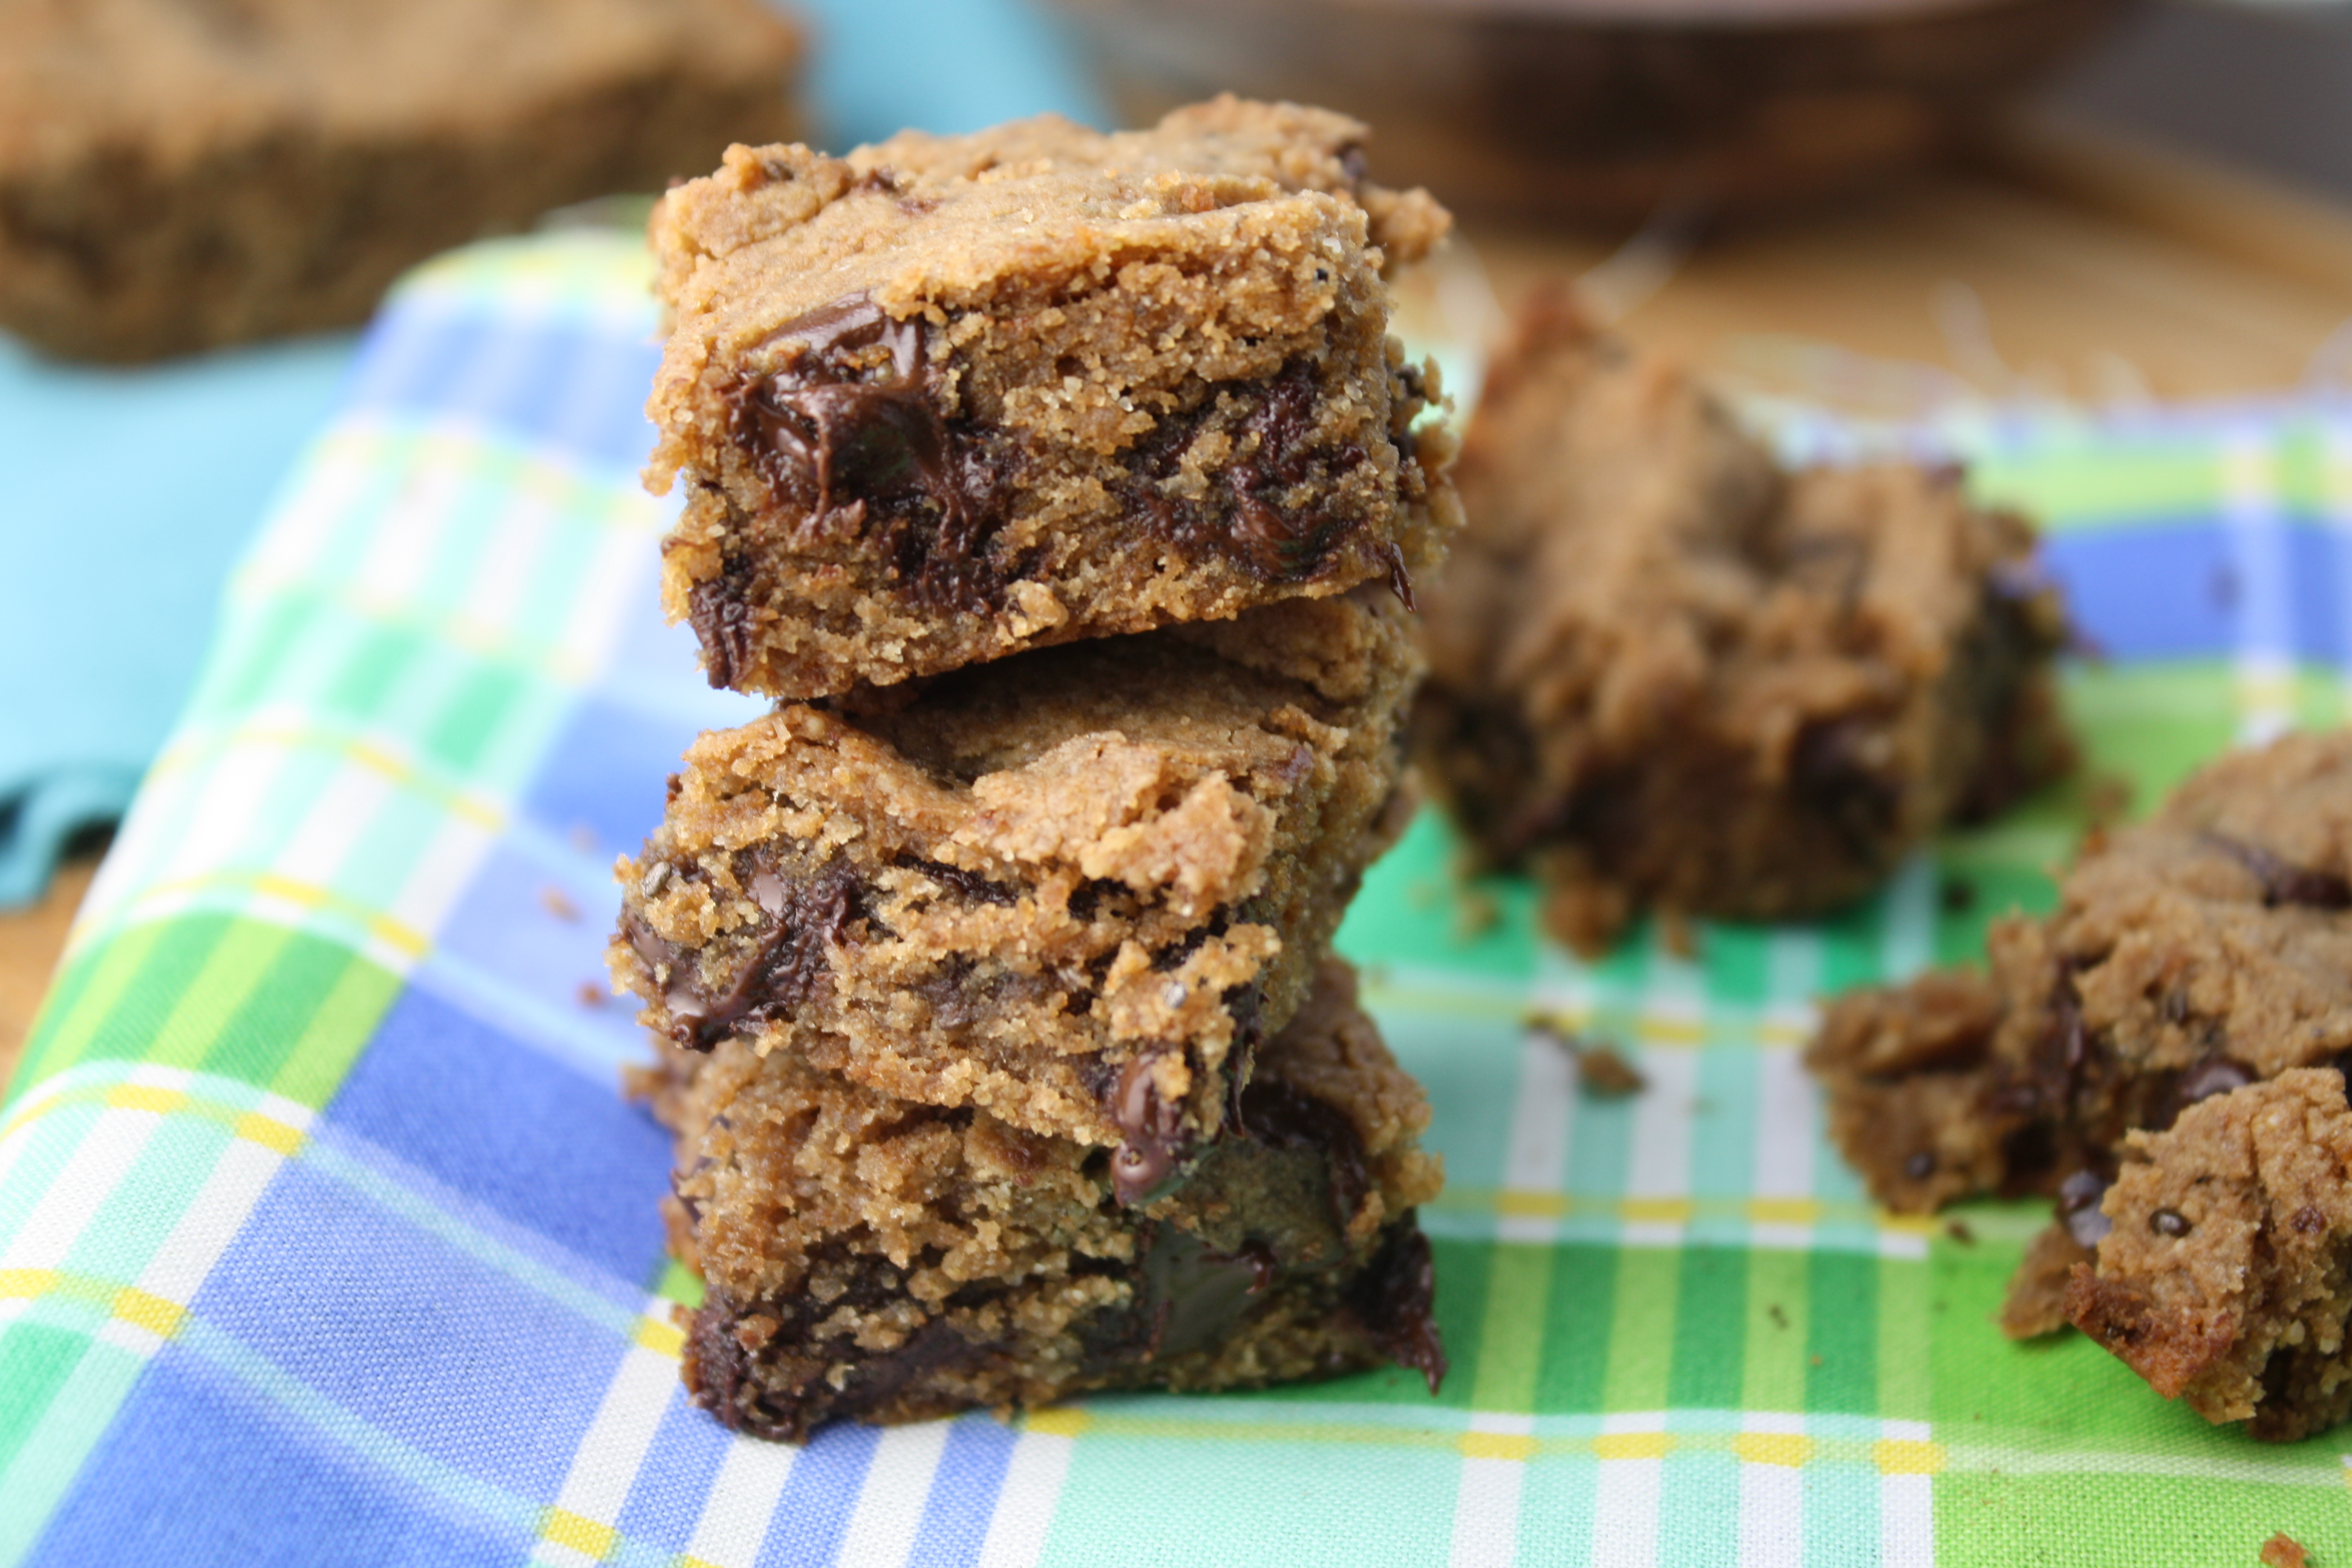 3 stacked squares of a sun butter and chococalte blondie atop a blue and green plaid cloth